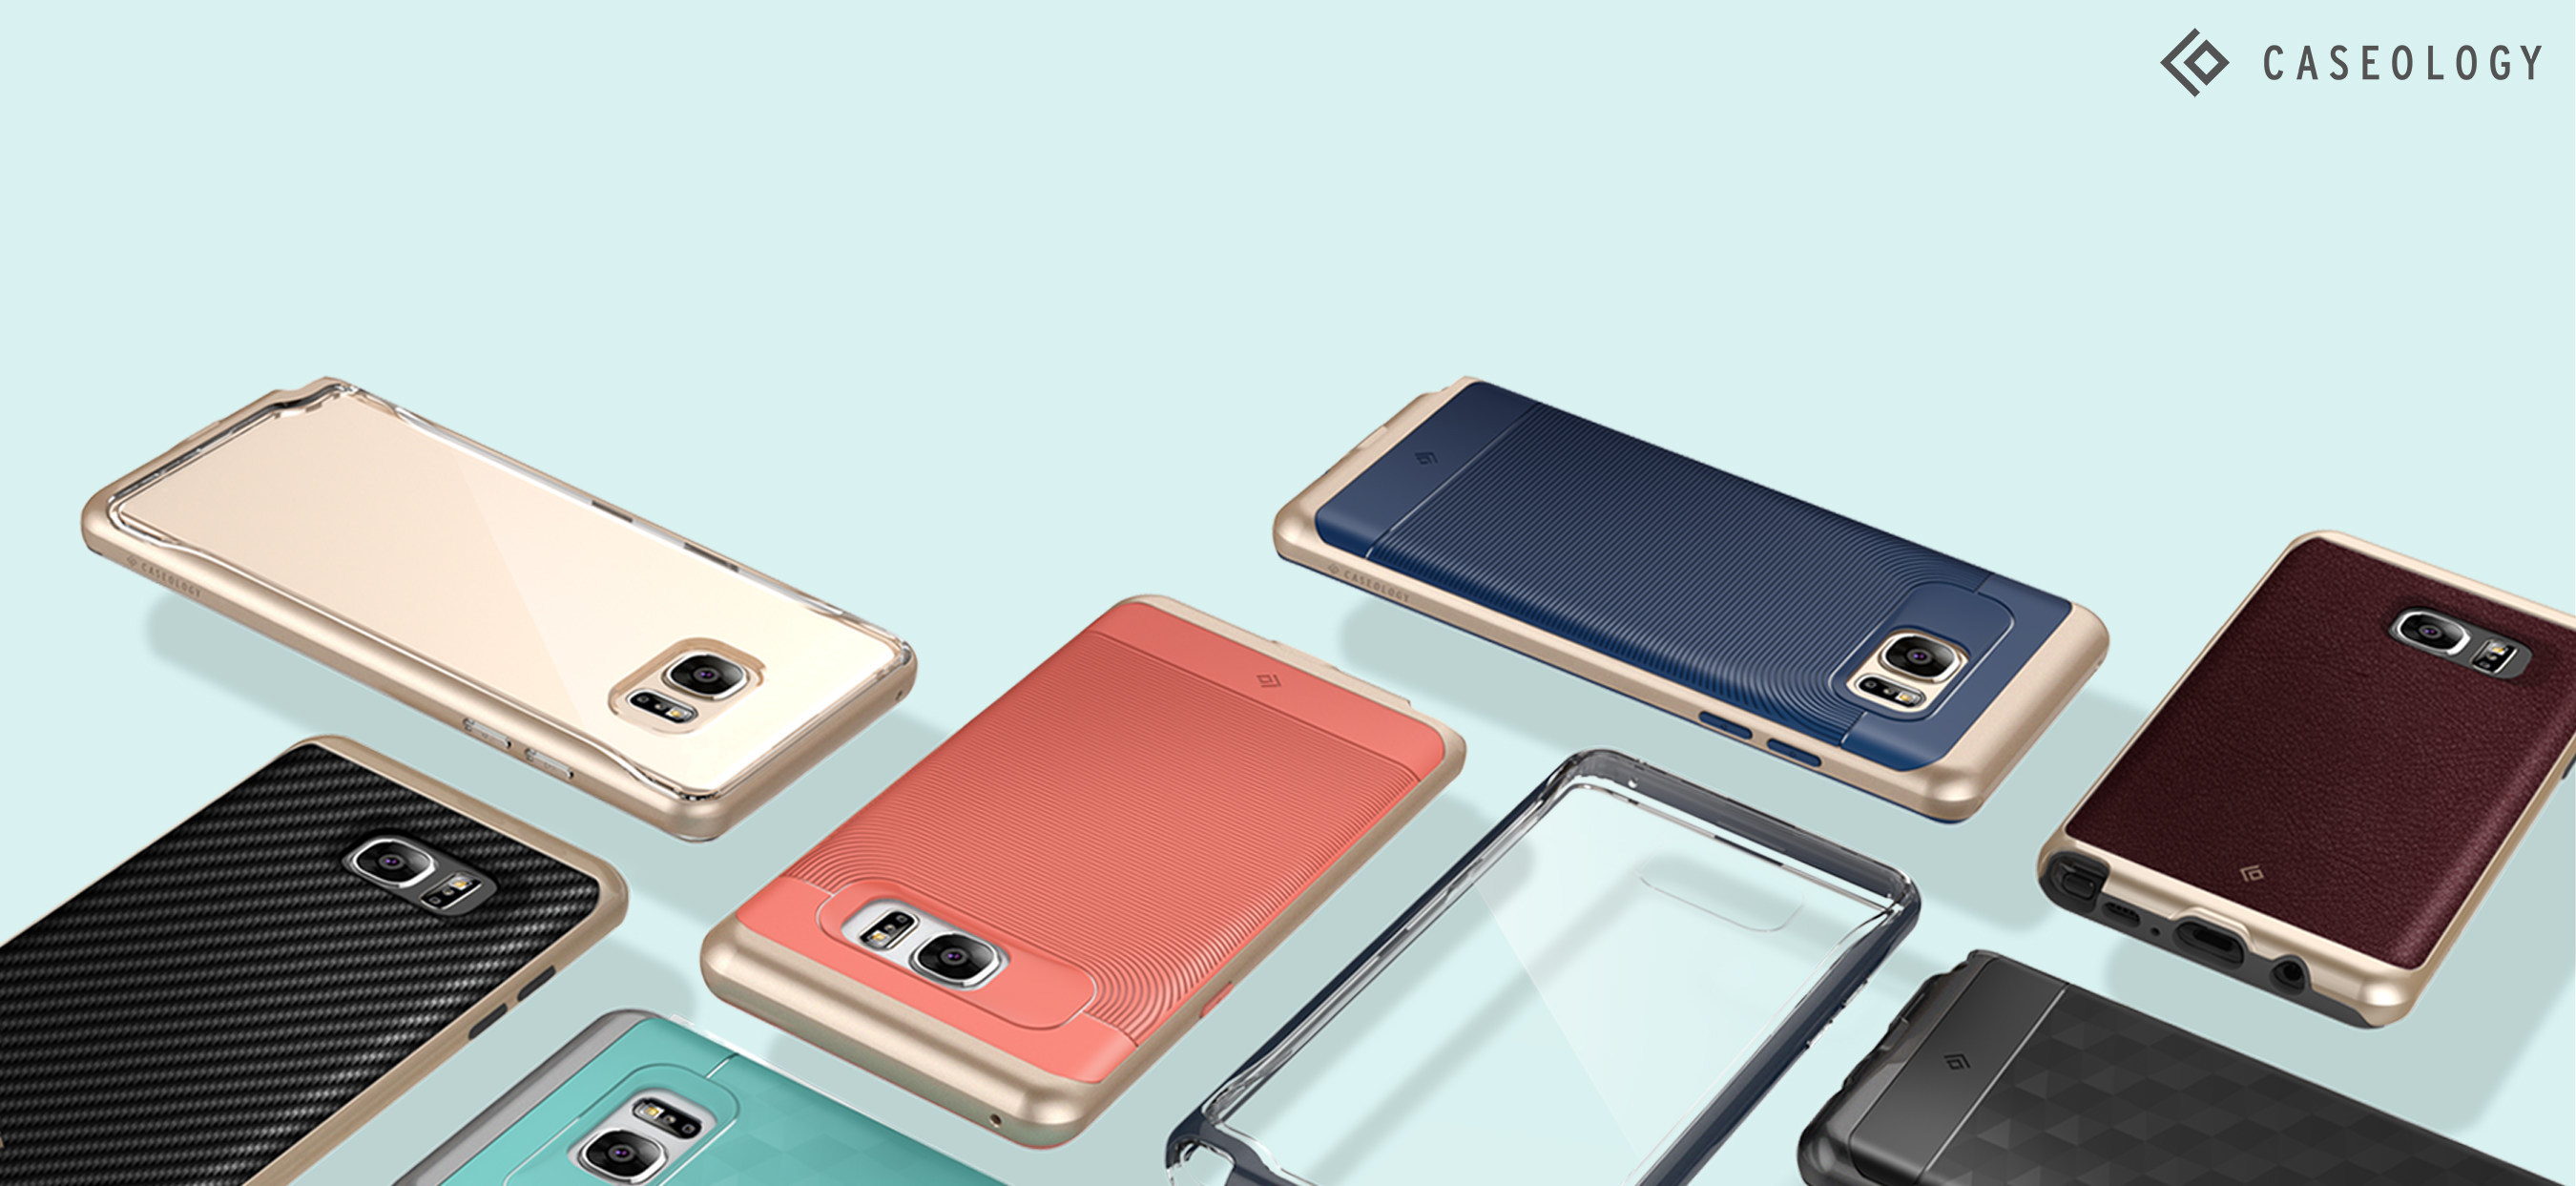 Caseology Announces Availability of Samsung Galaxy Note 7 Phone Cases